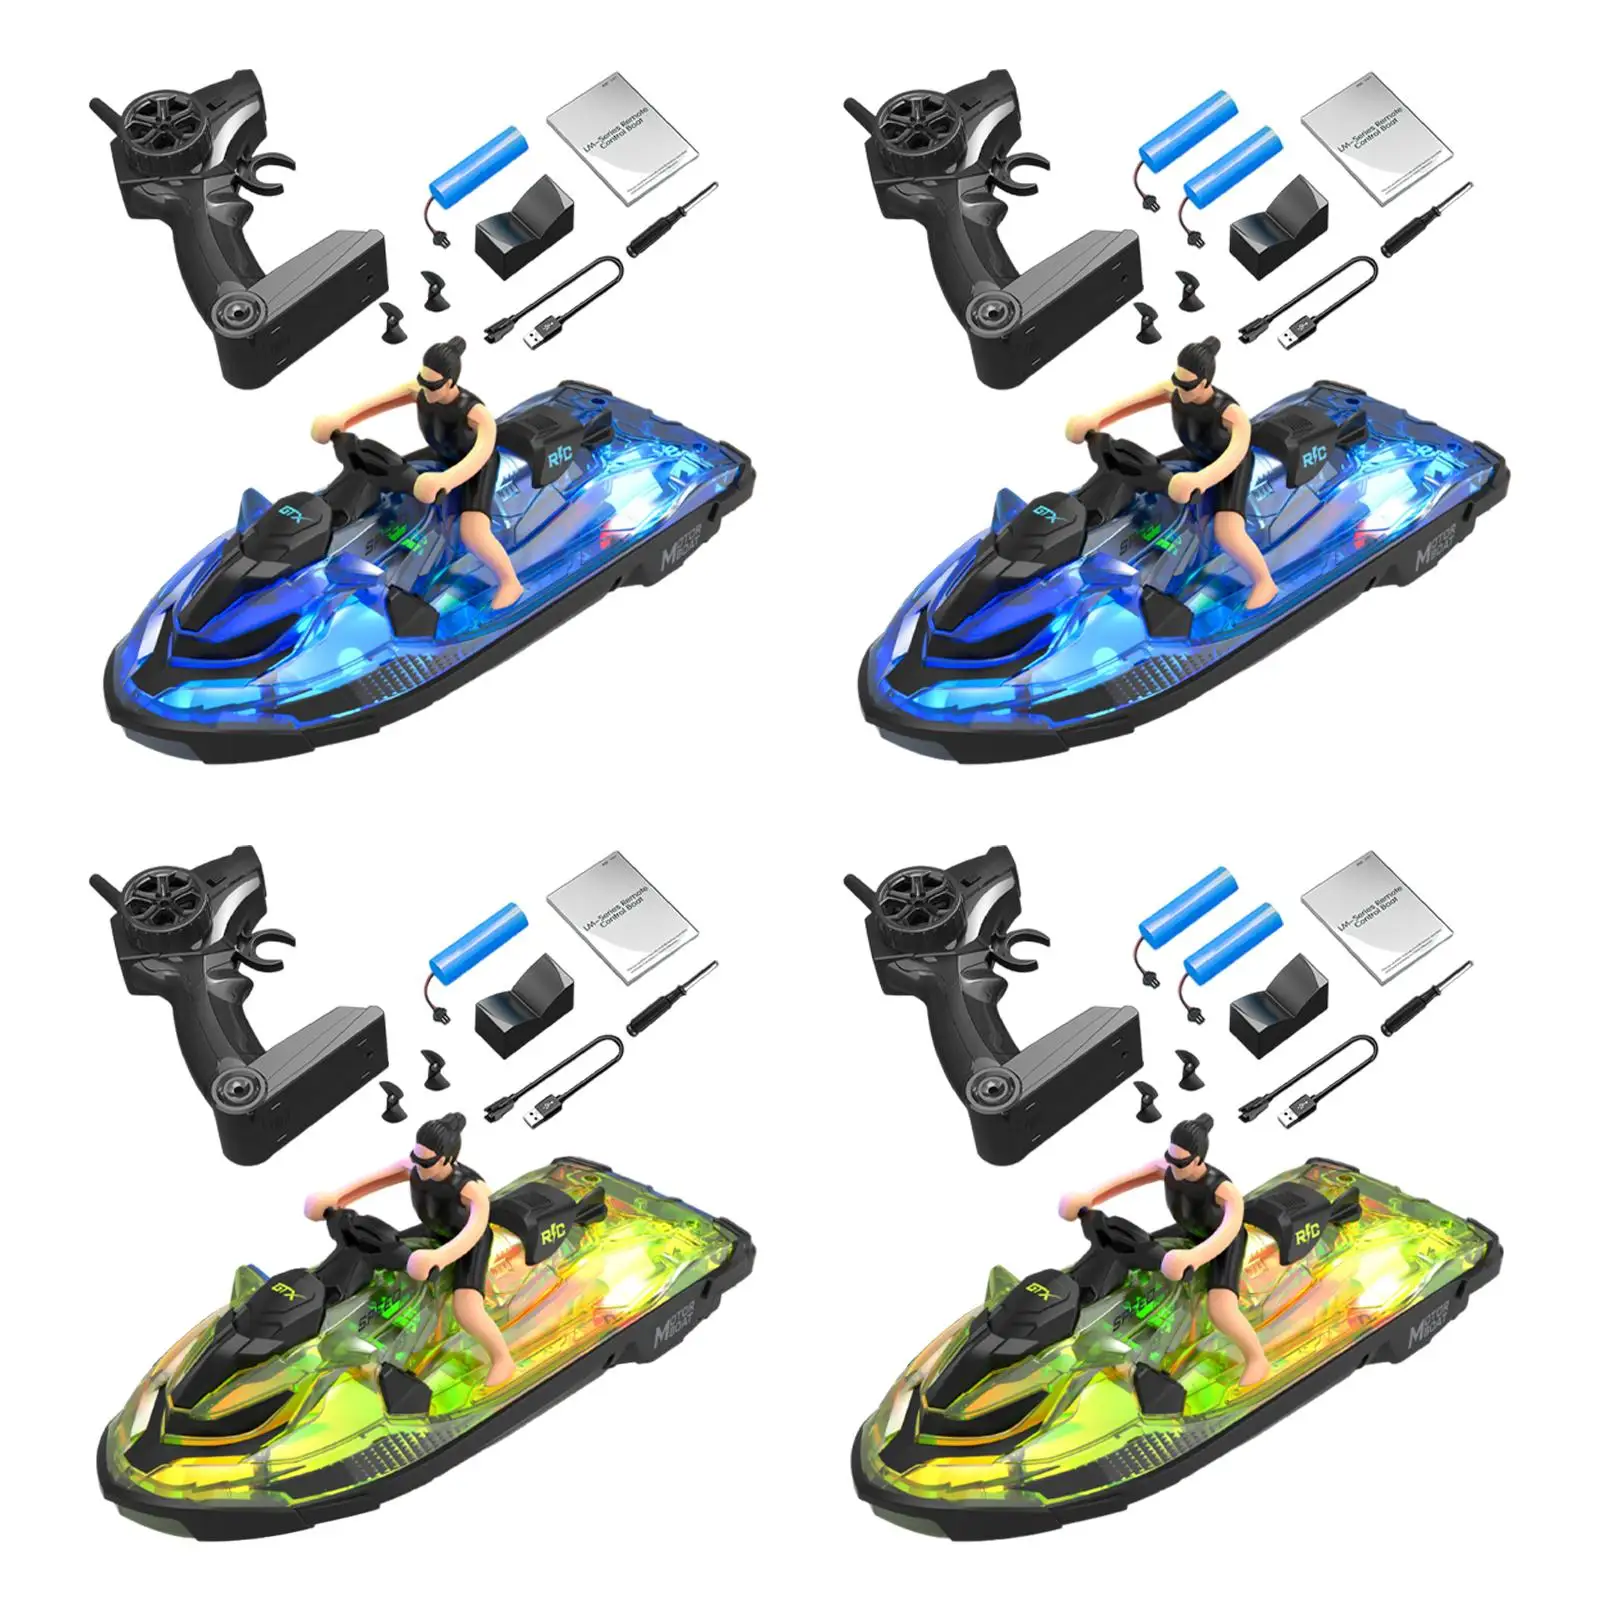 RC Speed Boat for Pools and Lakes Simulation Motorboat Fast Remote Control Boat Speedboat for Girls Boys Kids Adults Gifts